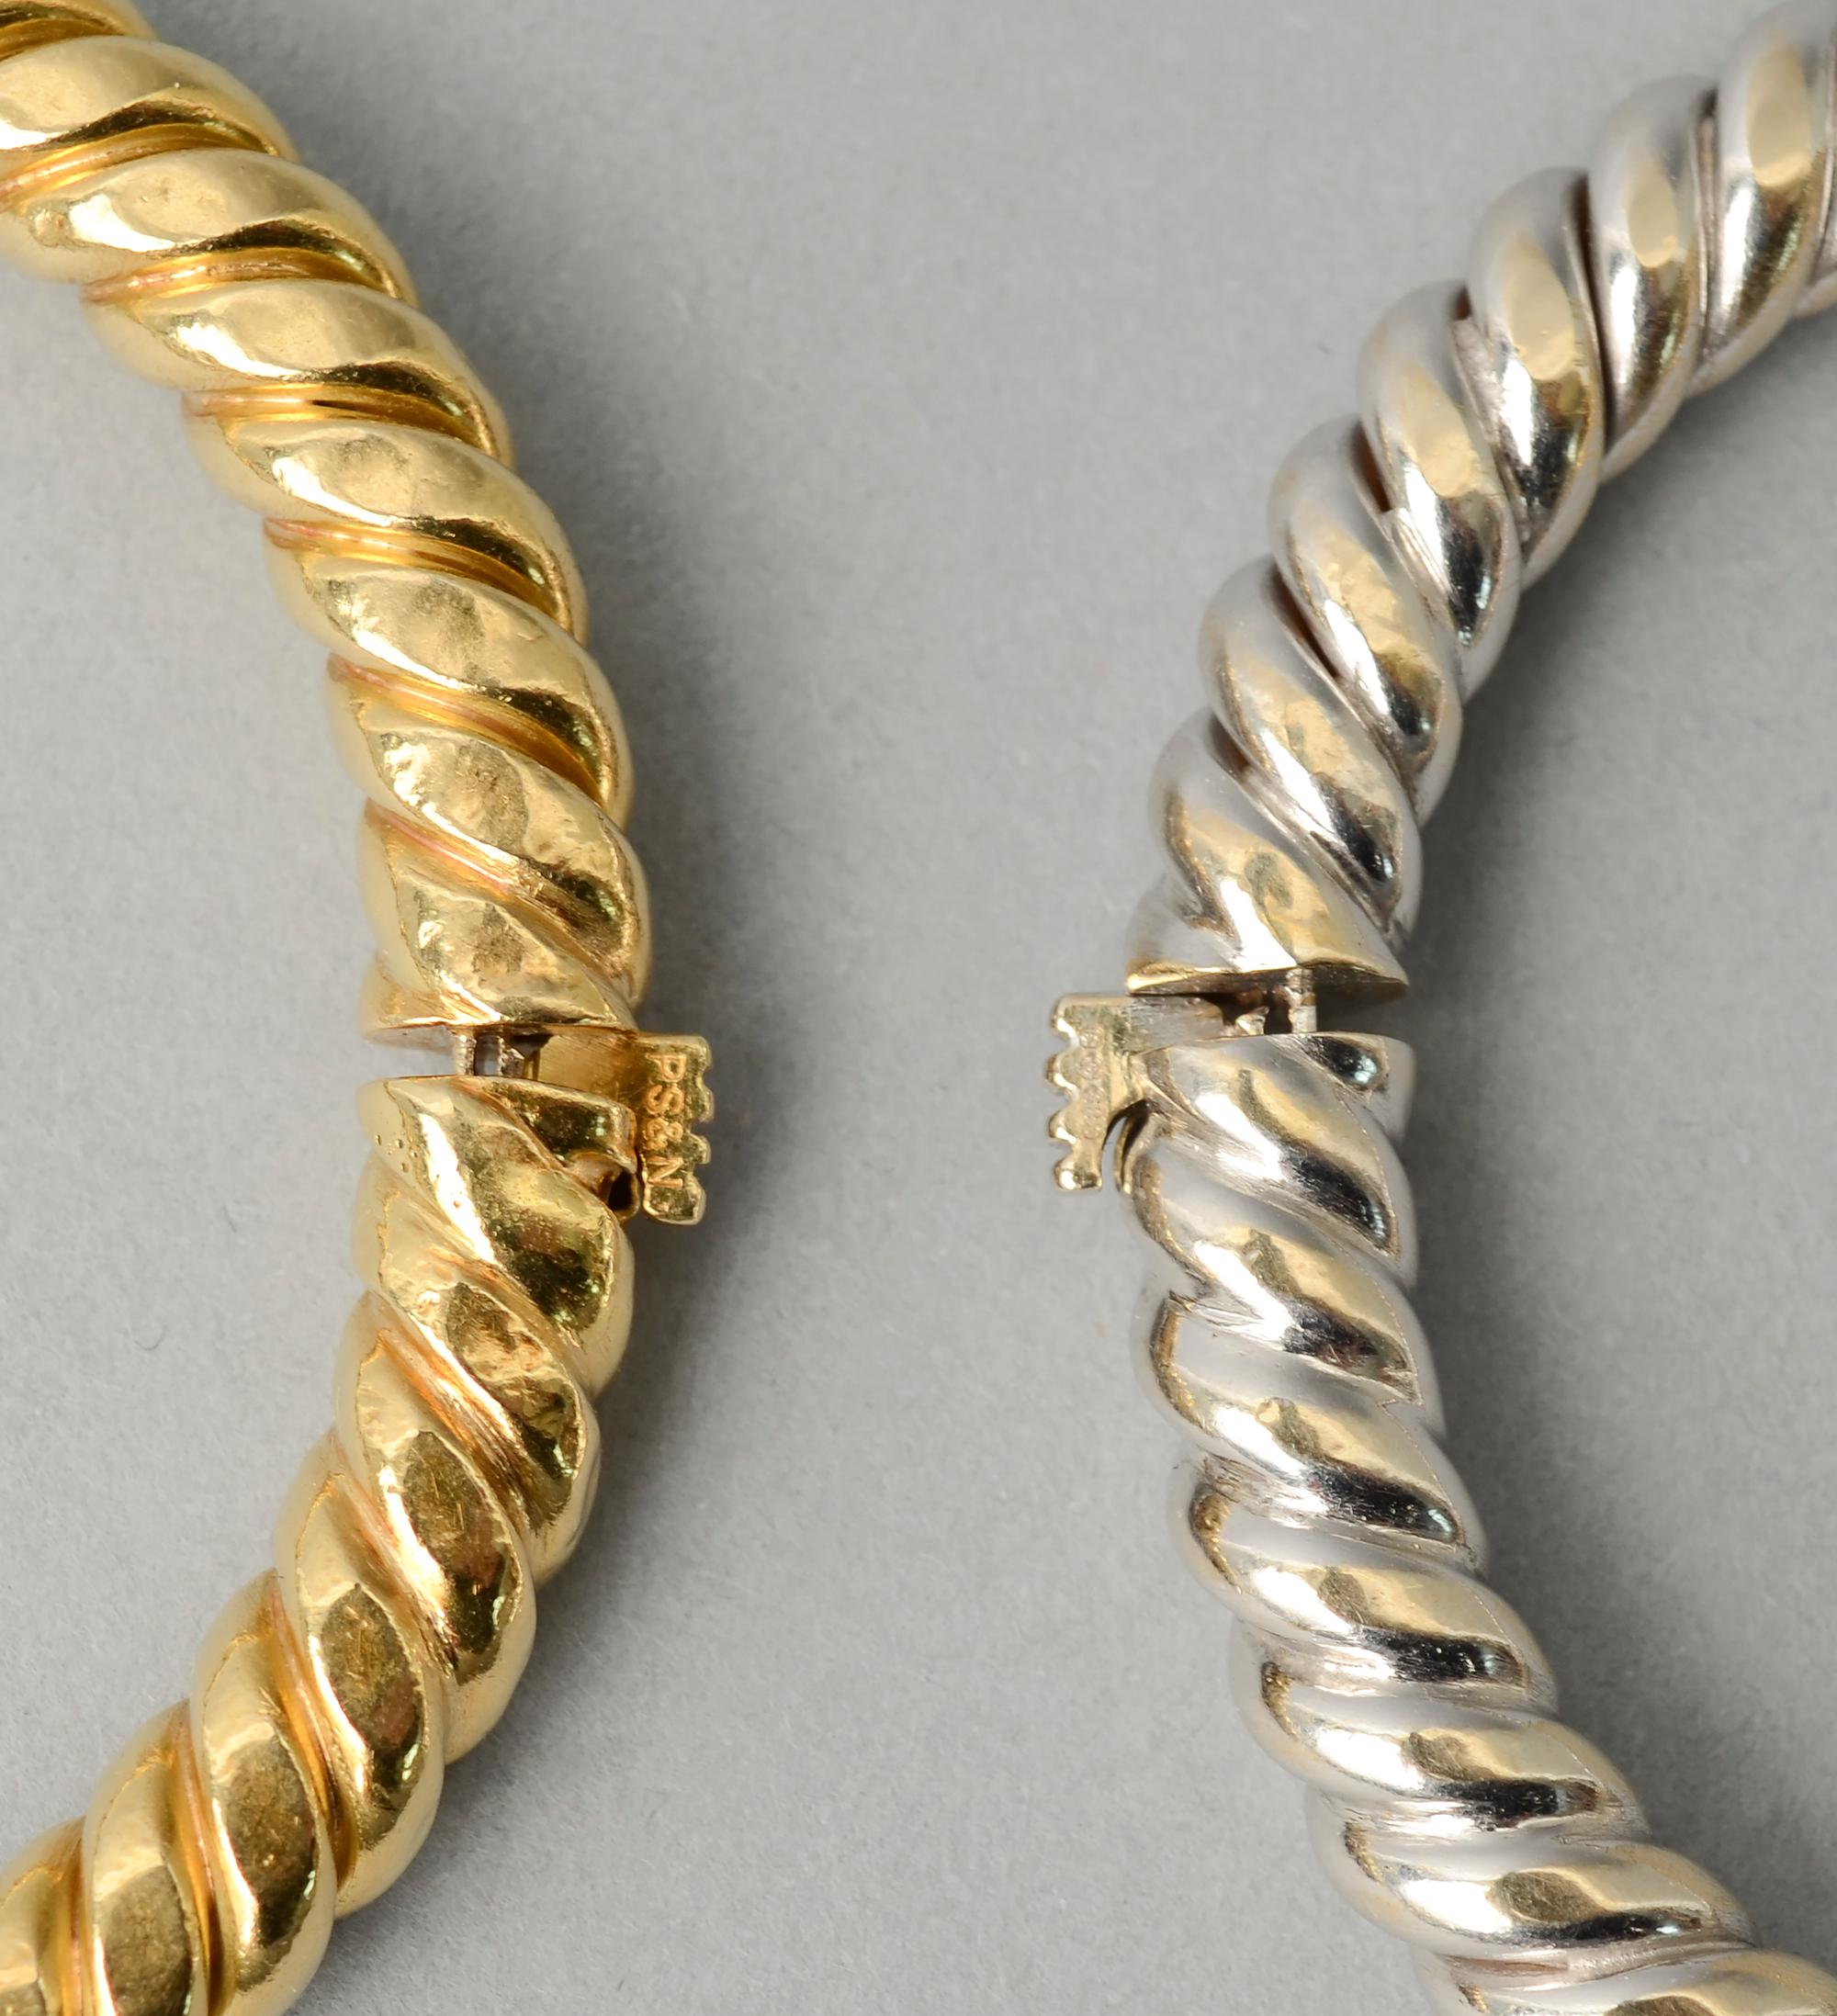 Modern Van Cleef & Arpels Pair of Yellow and White Twisted Gold Bangle Bracelets